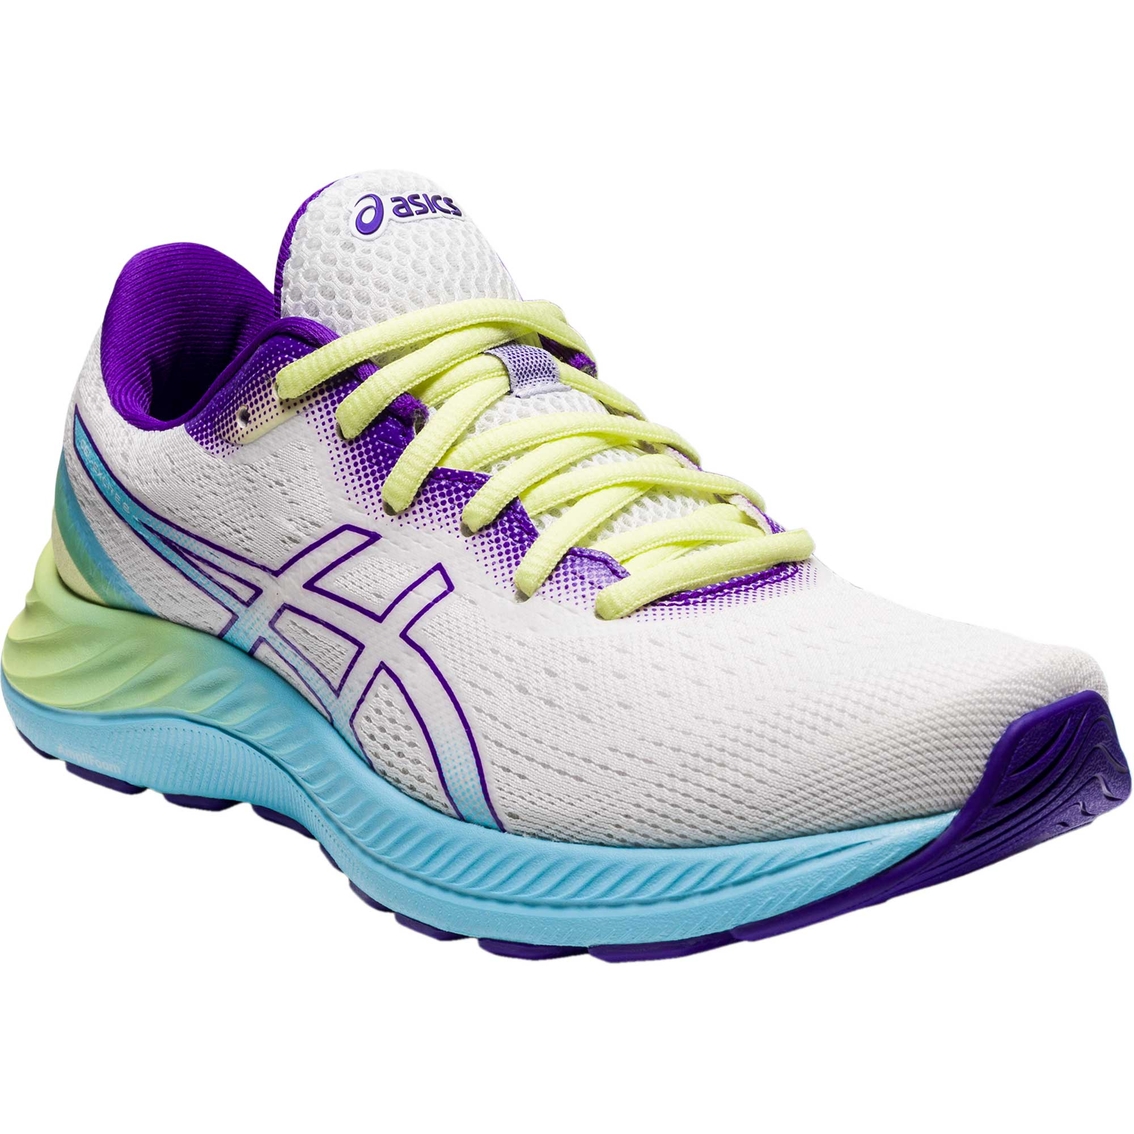 Asics Women's Gel Excite 8 Running Shoes | Women's Athletic Shoes ...